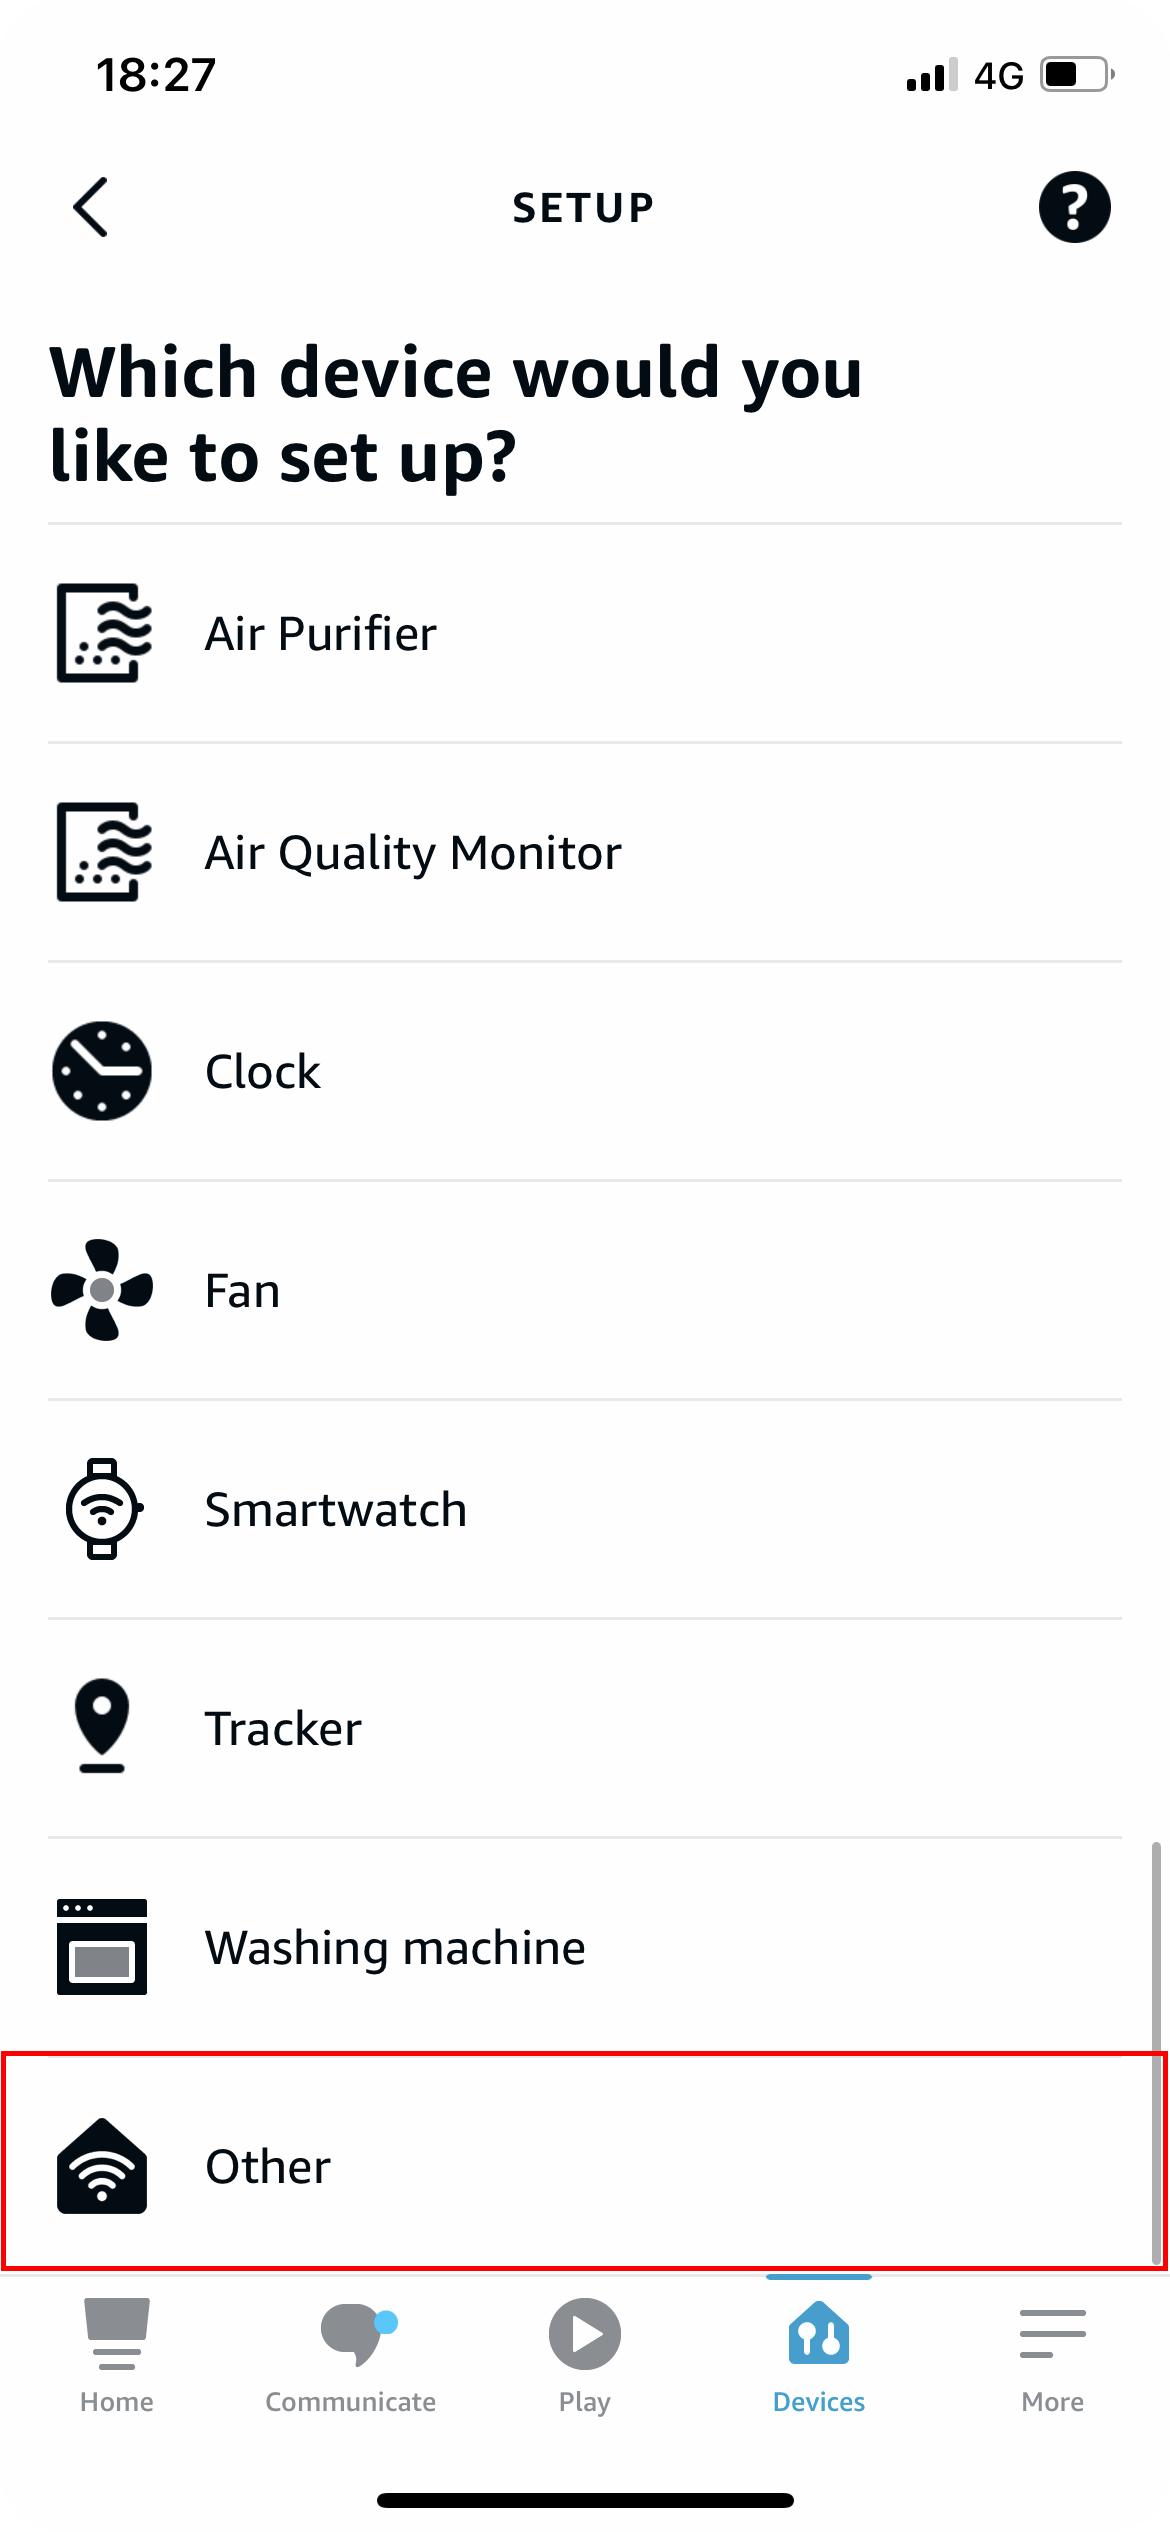 Adding type of devices "Others"